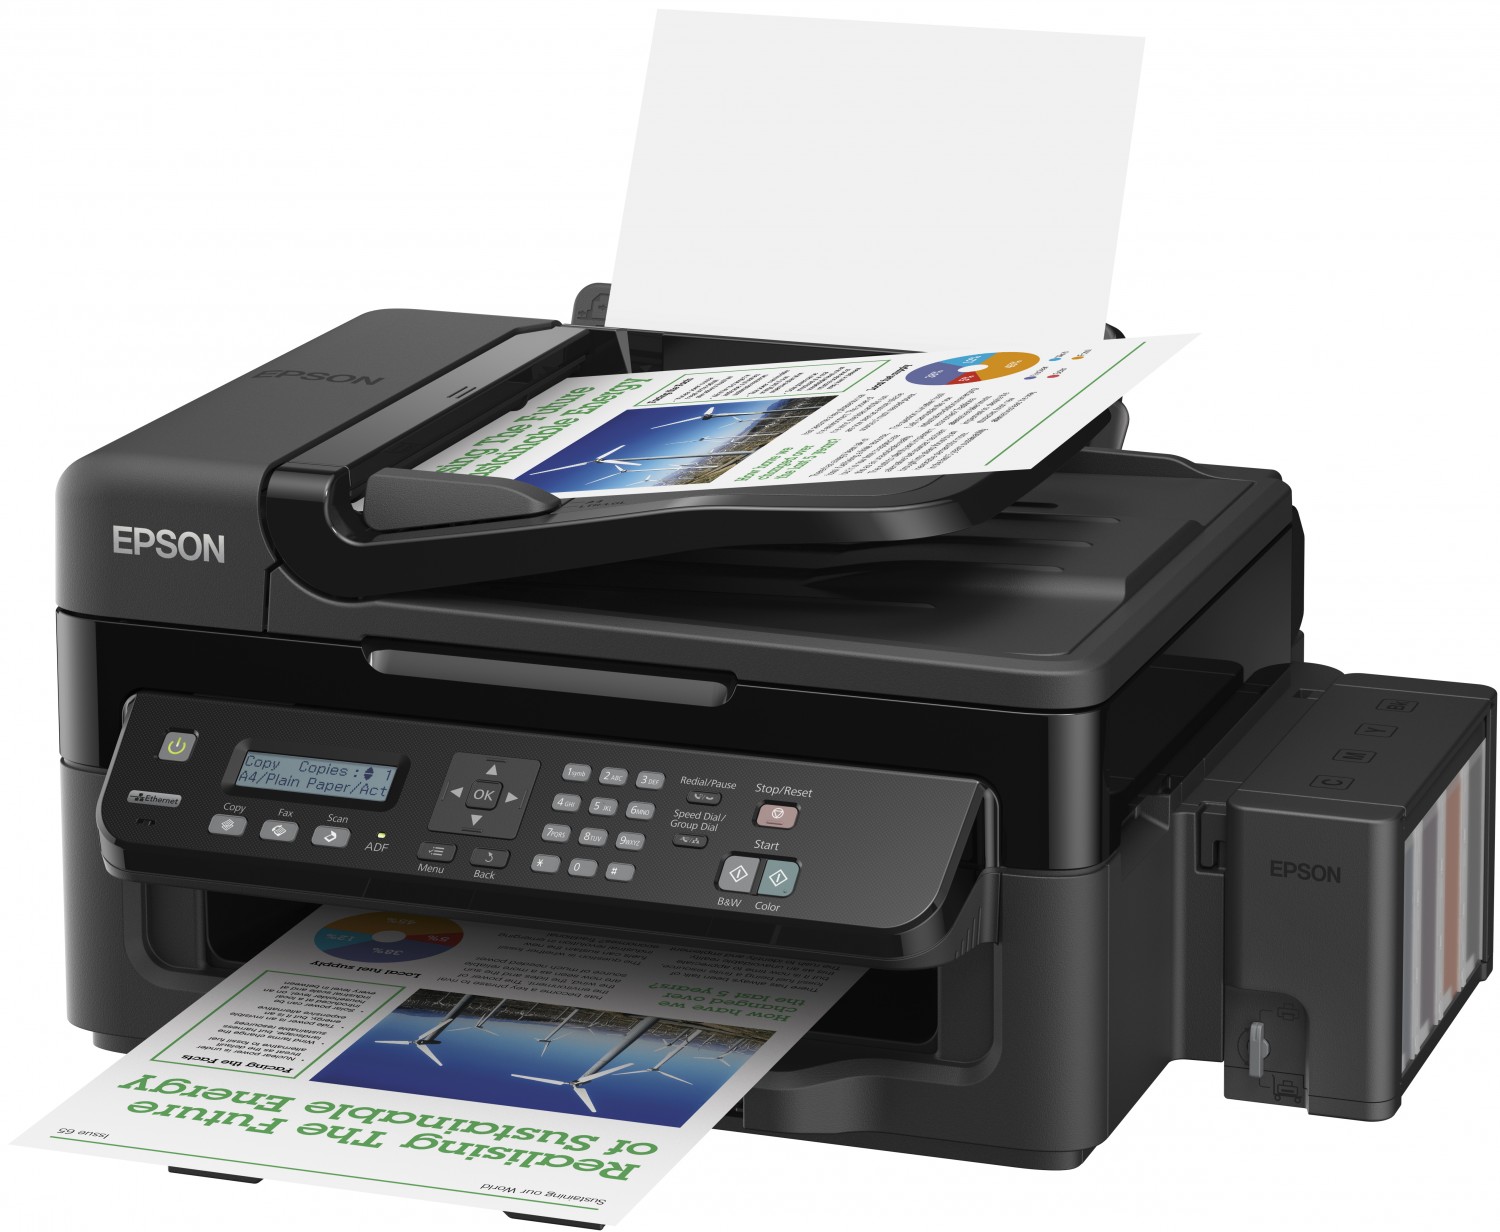 Epson L3250 Resetter: Download Free Software for Resetting Your Printer